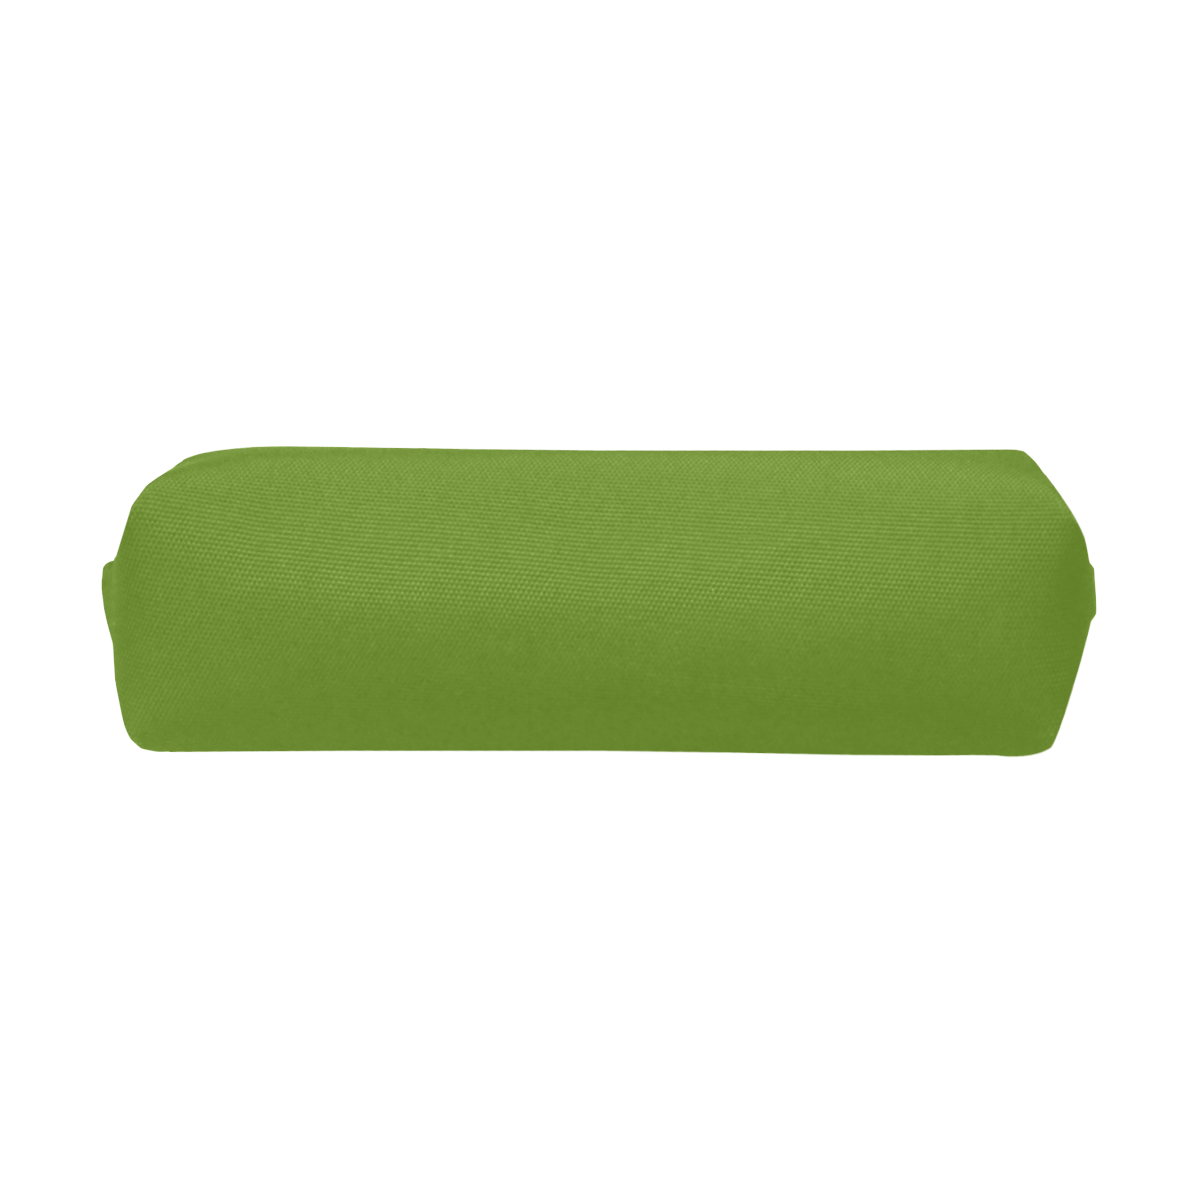 color olive drab Pencil Pouch/Small (Model 1681)